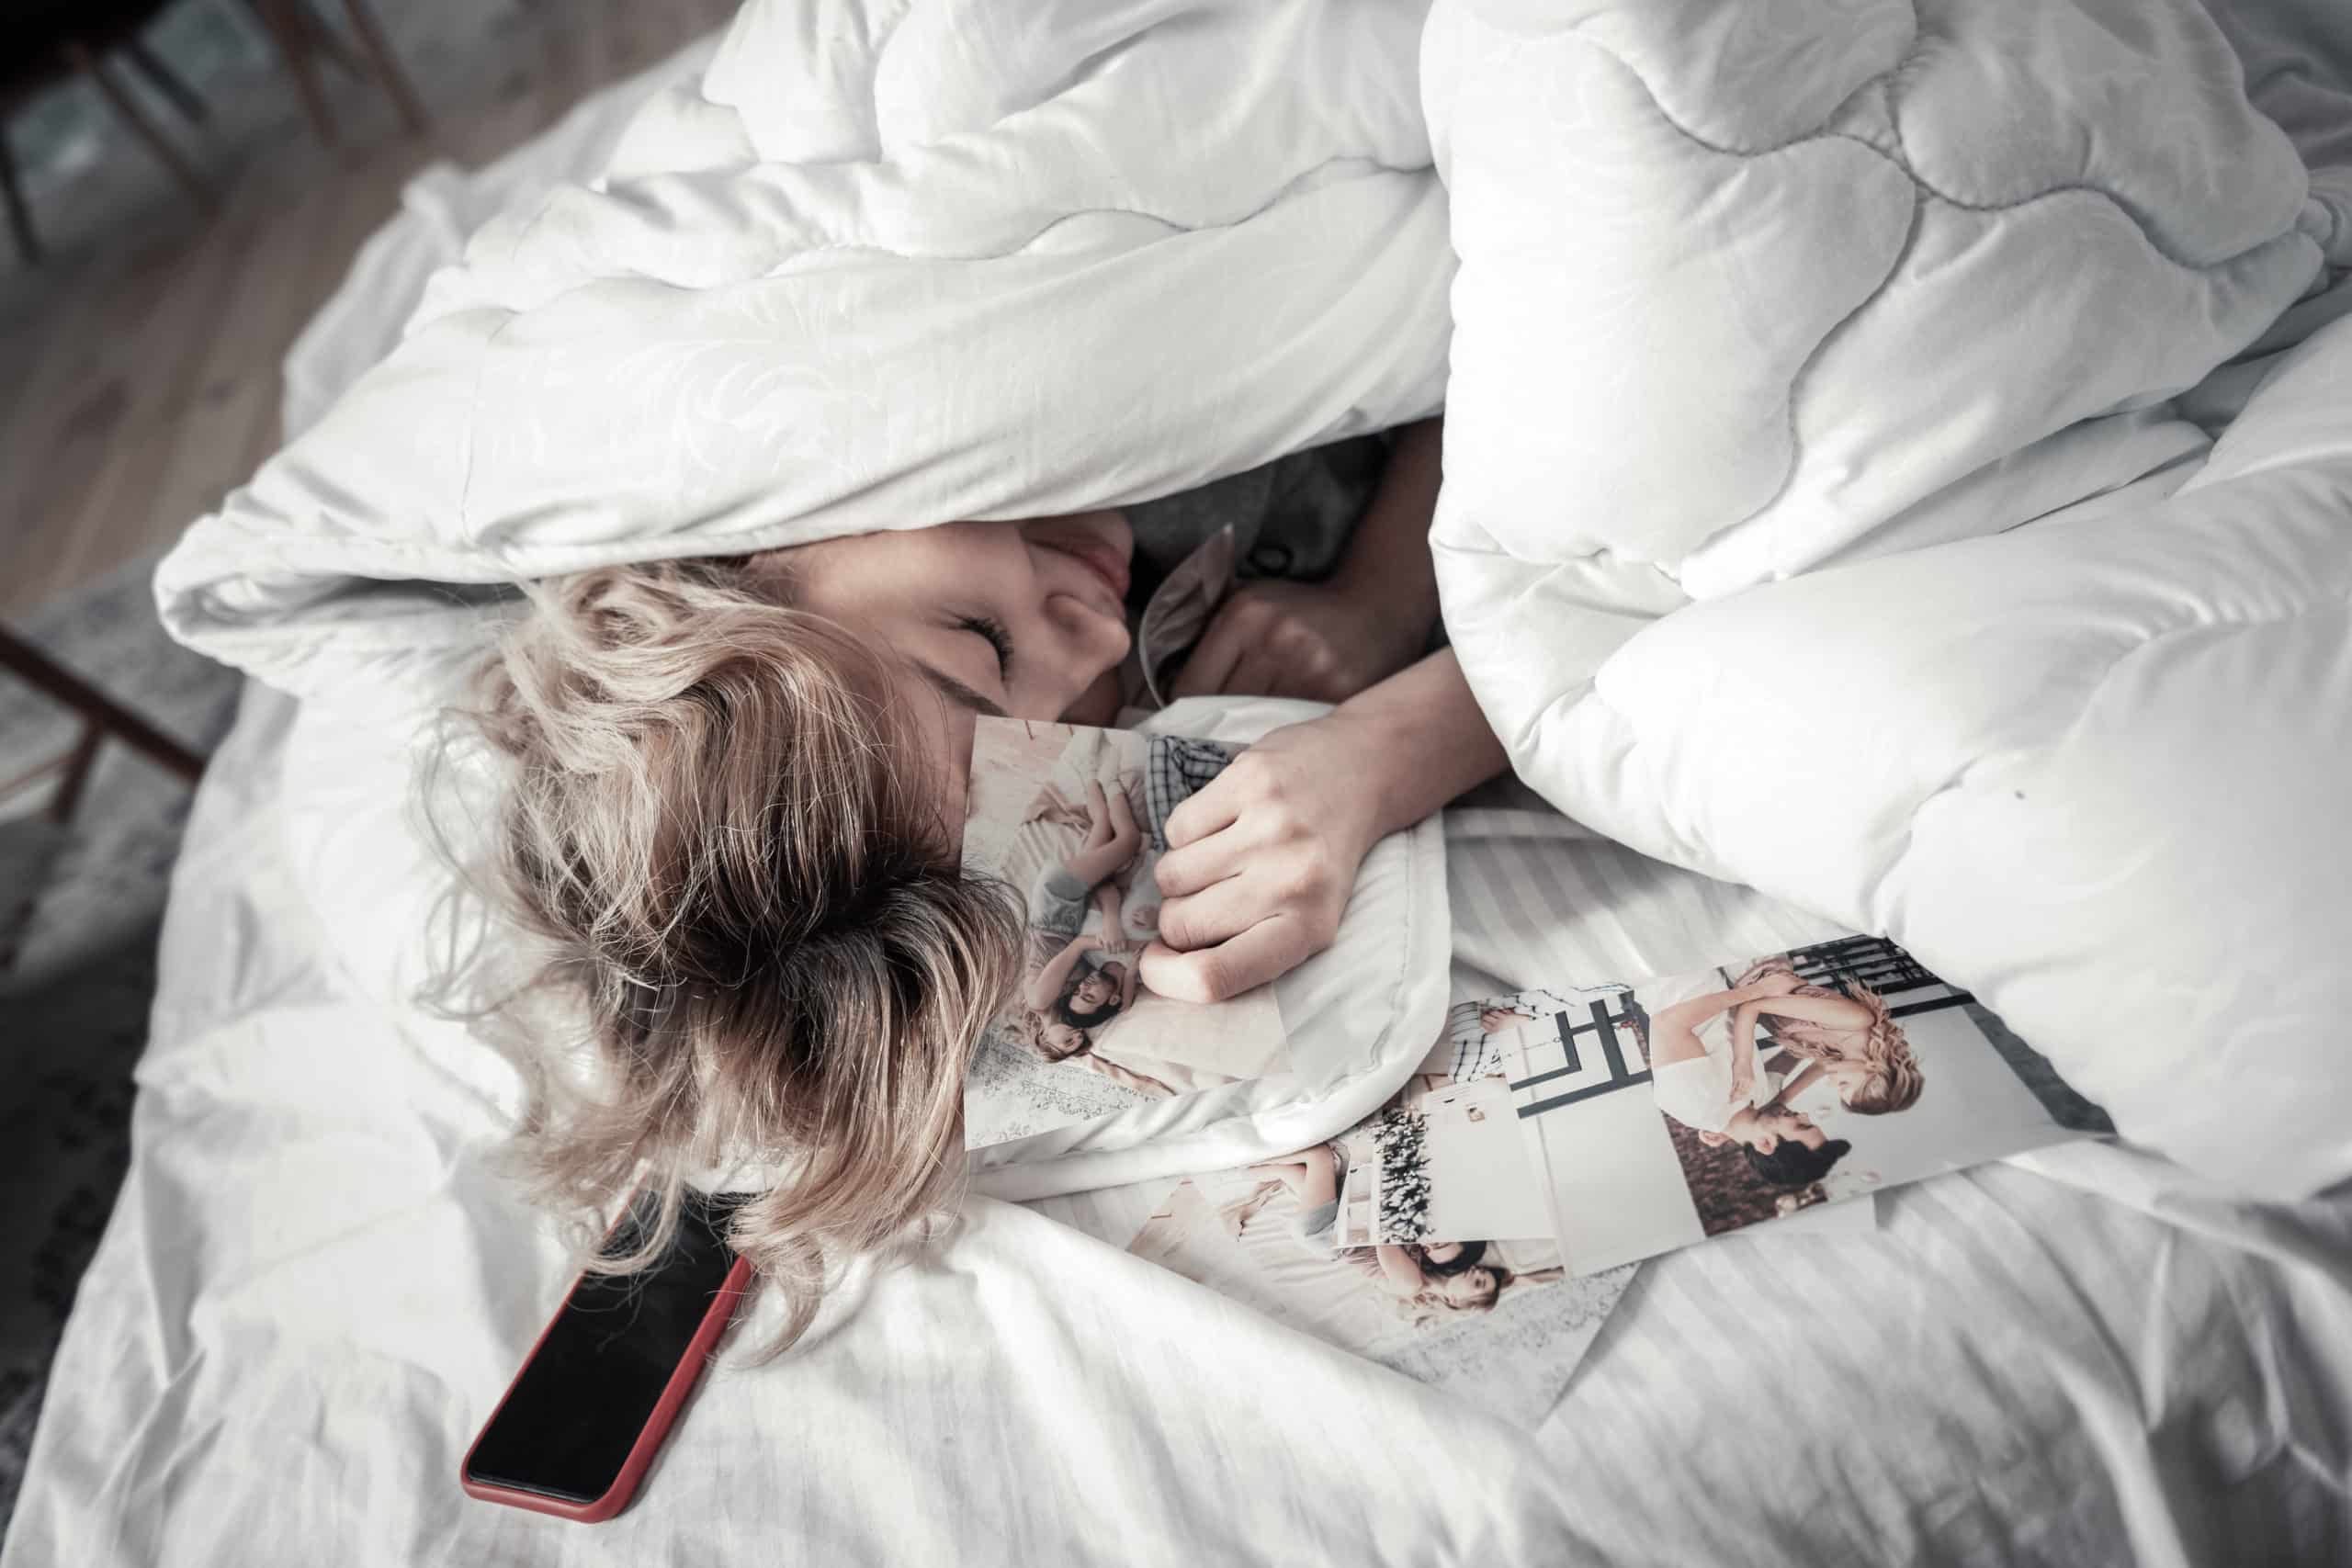 Young woman lying under blanket with photos with ex boyfriend